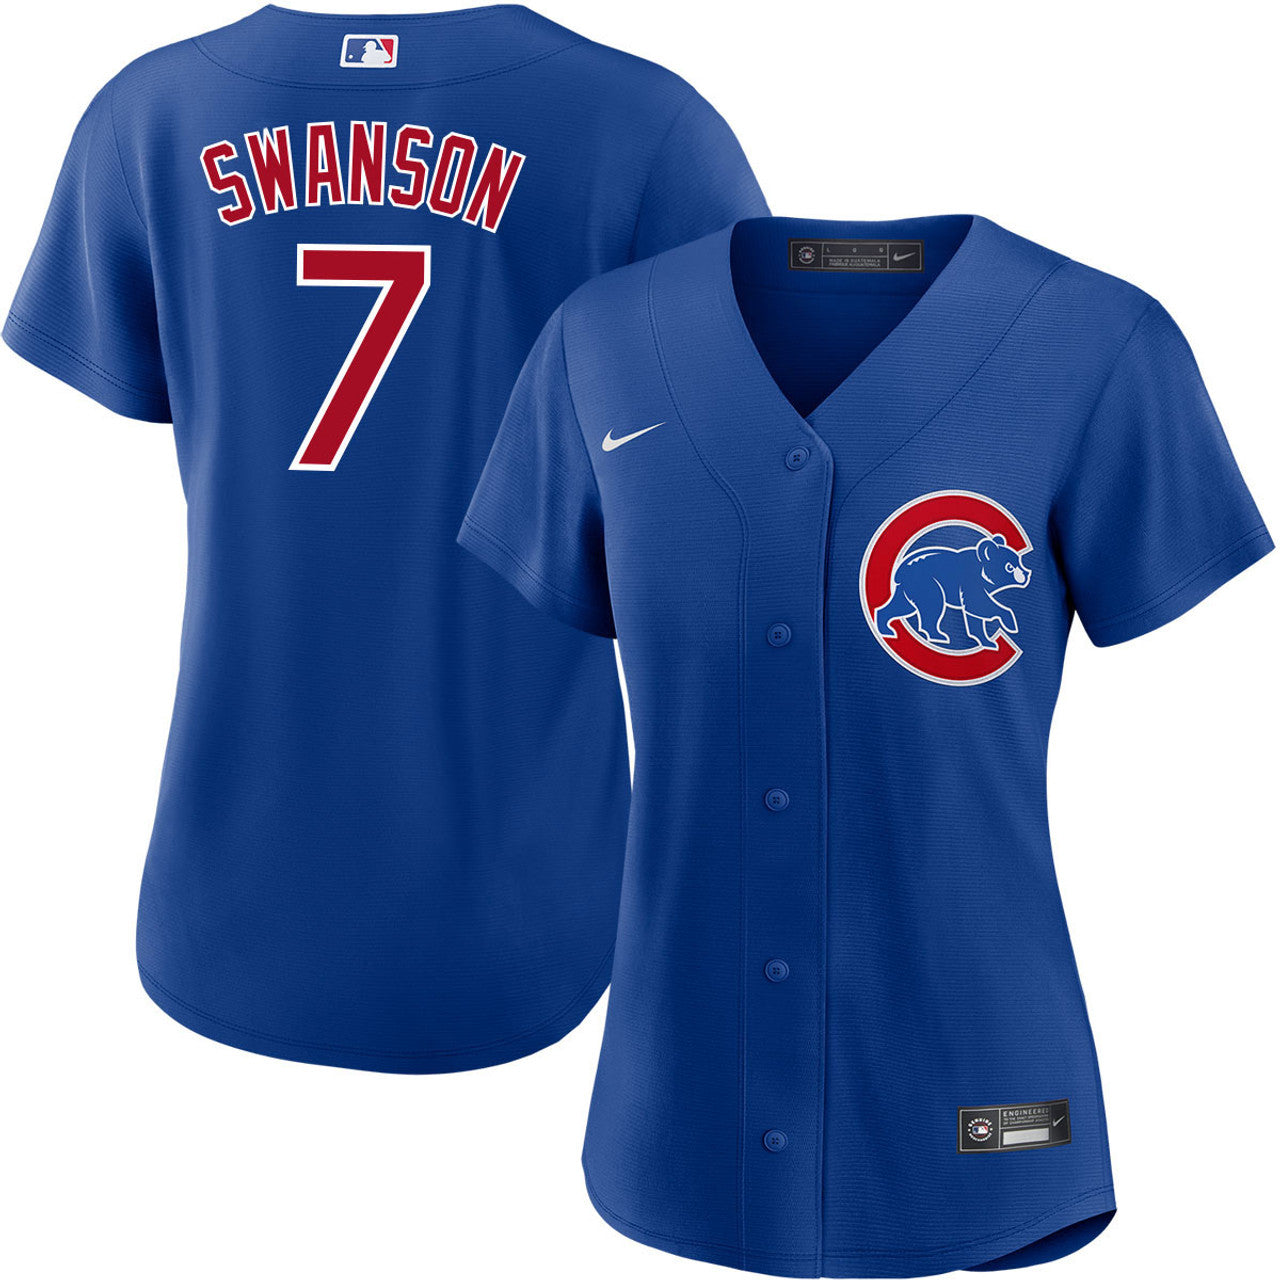 Chicago Cubs Nike Men's Dansby Swanson Home Replica Jersey 3XL